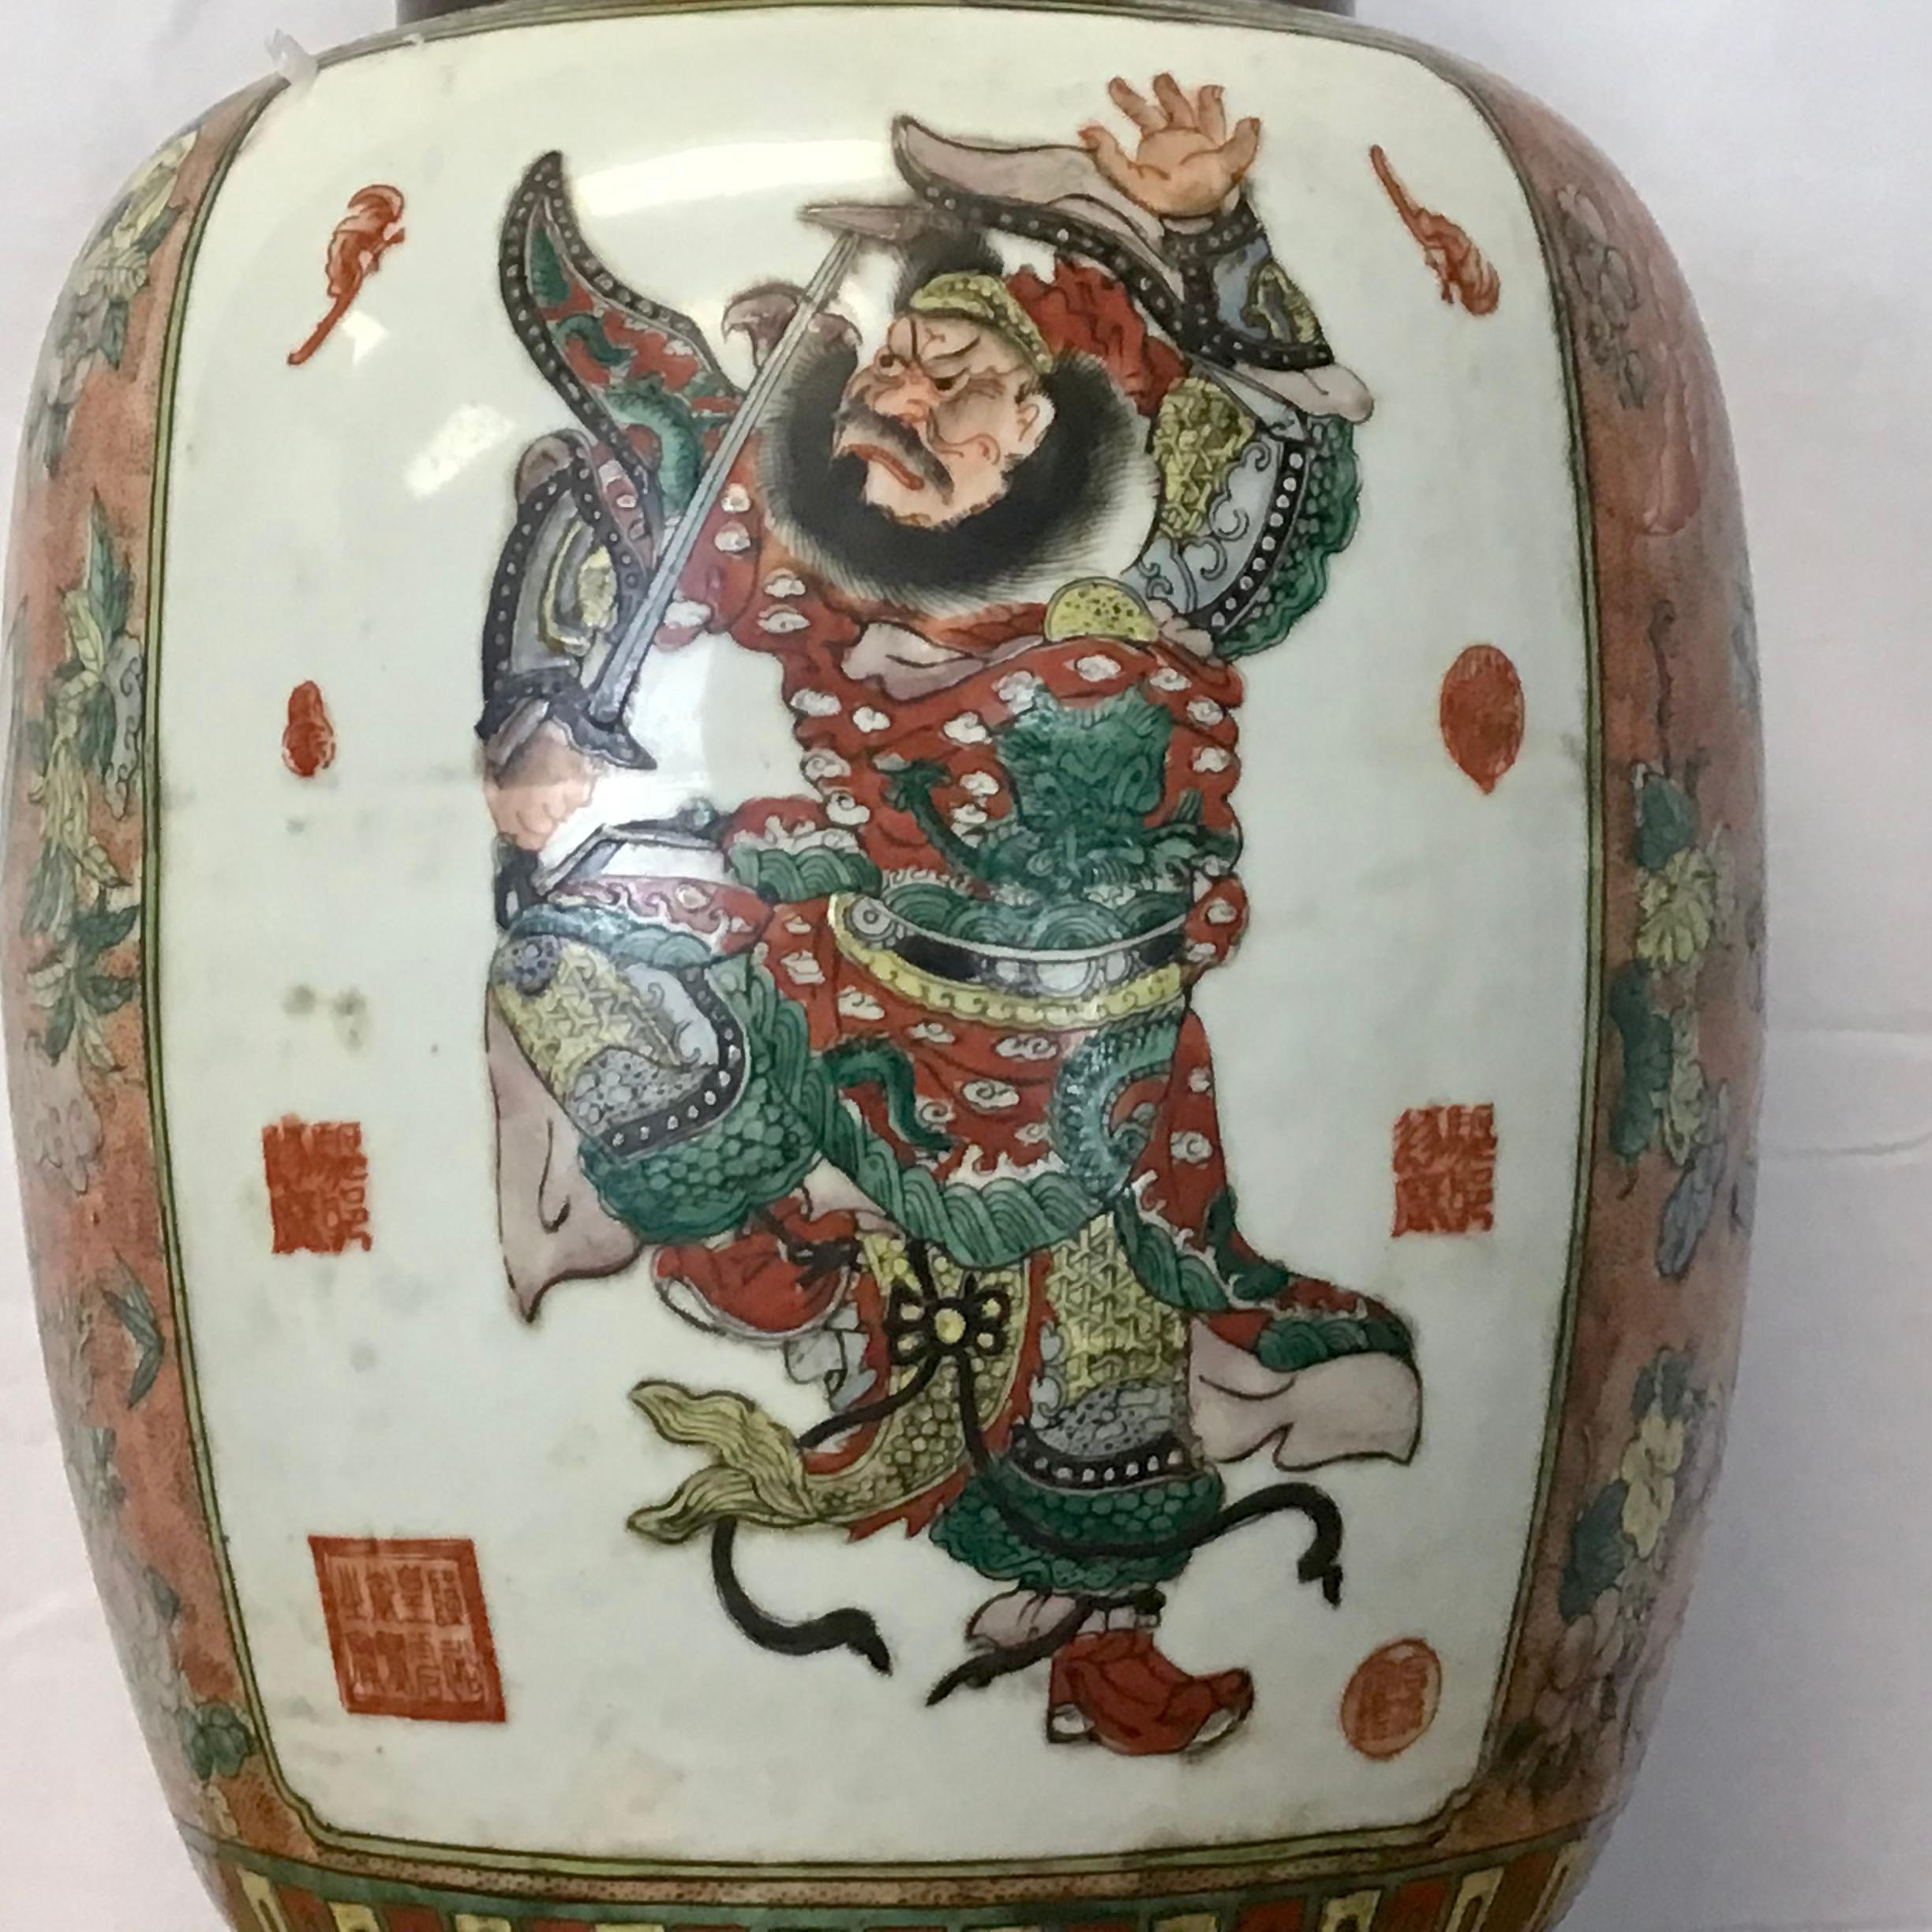 This is a rather stunning Chinese porcelain vase made for export to the West in the early 20th century. The vase has been mounted on a heavy brass base.
The porcelain is painted with a very lively guardian scene on front and back side. Butterflies,